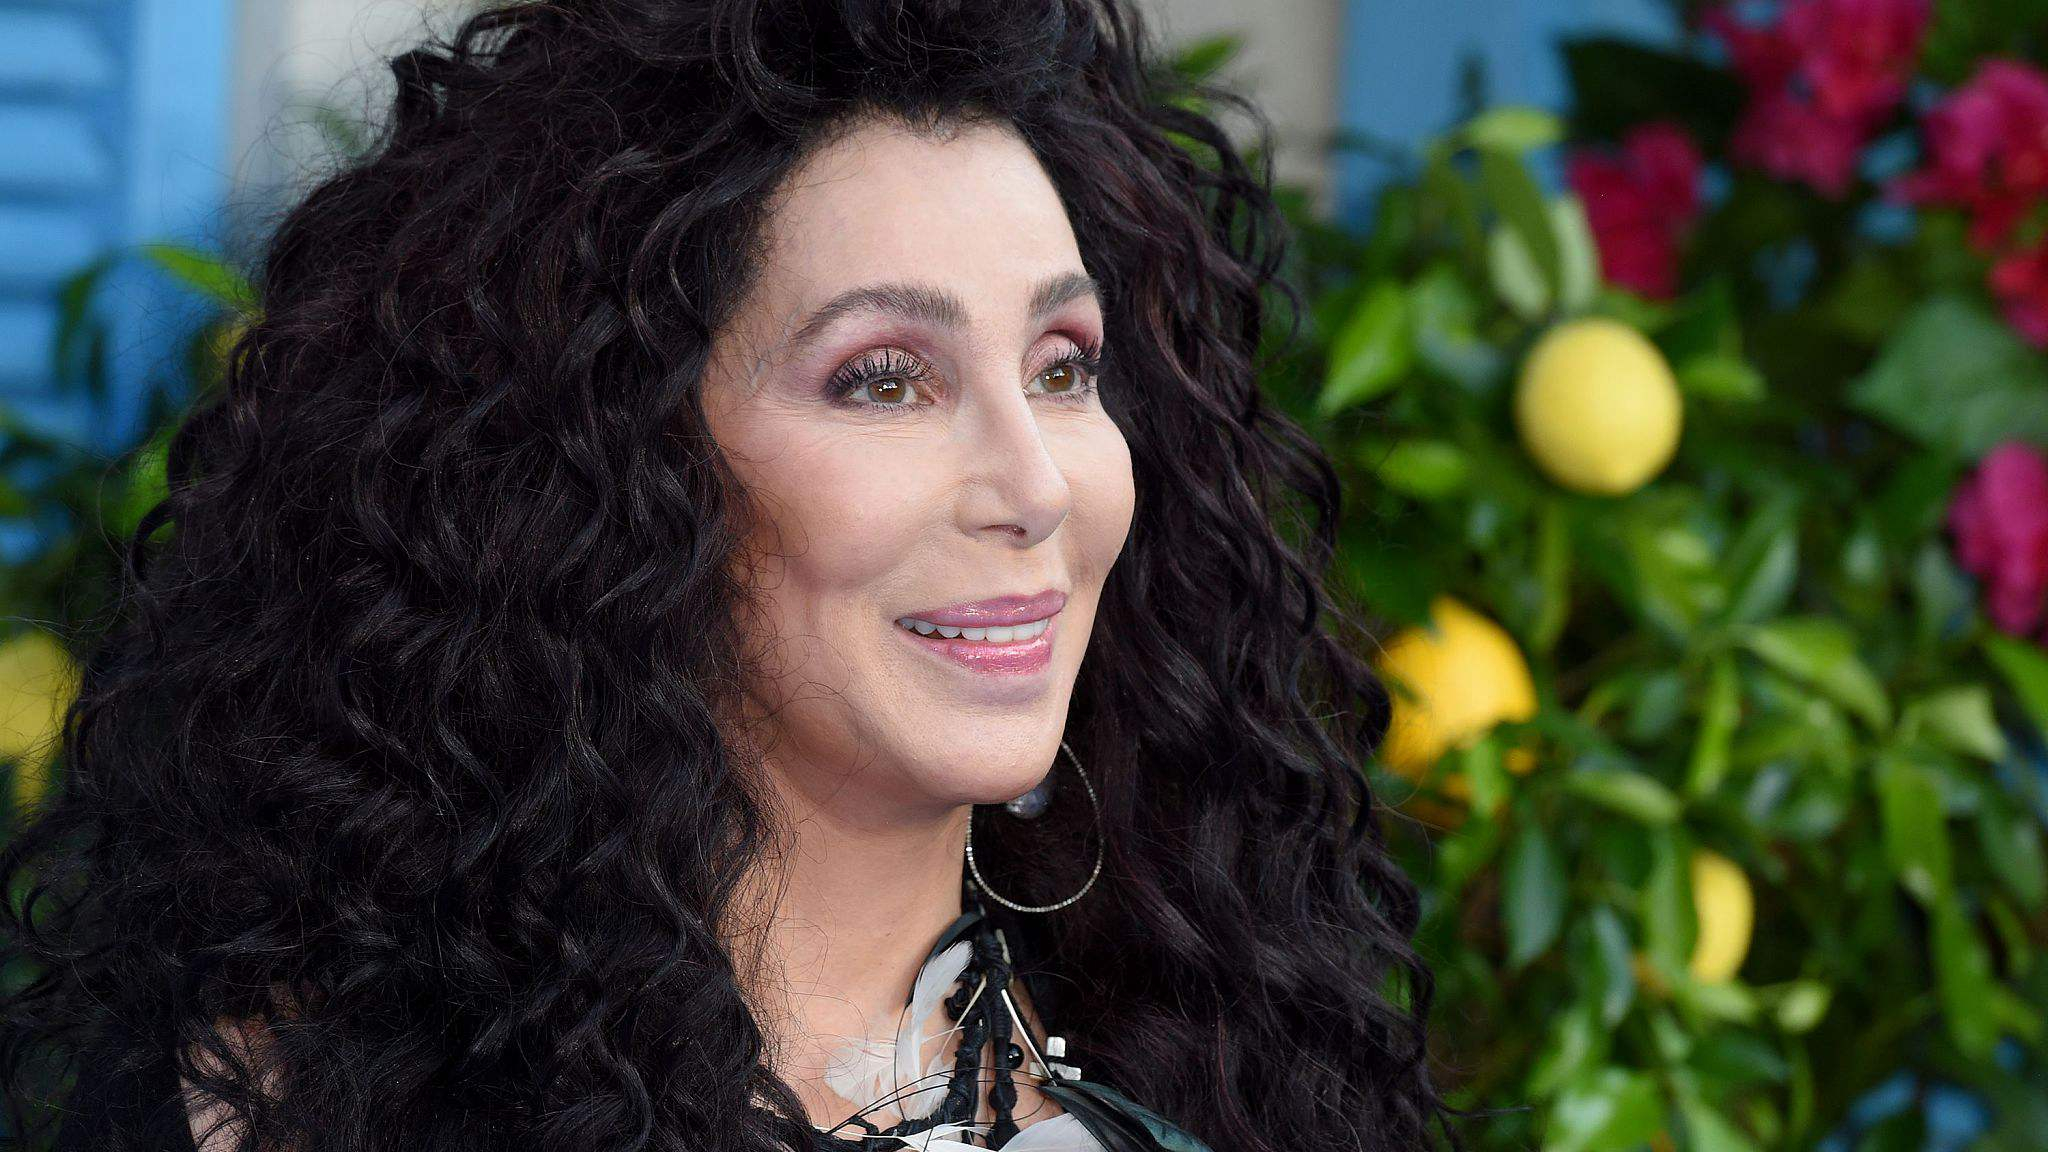 Cher to release album of Abba covers after Mamma Mia 